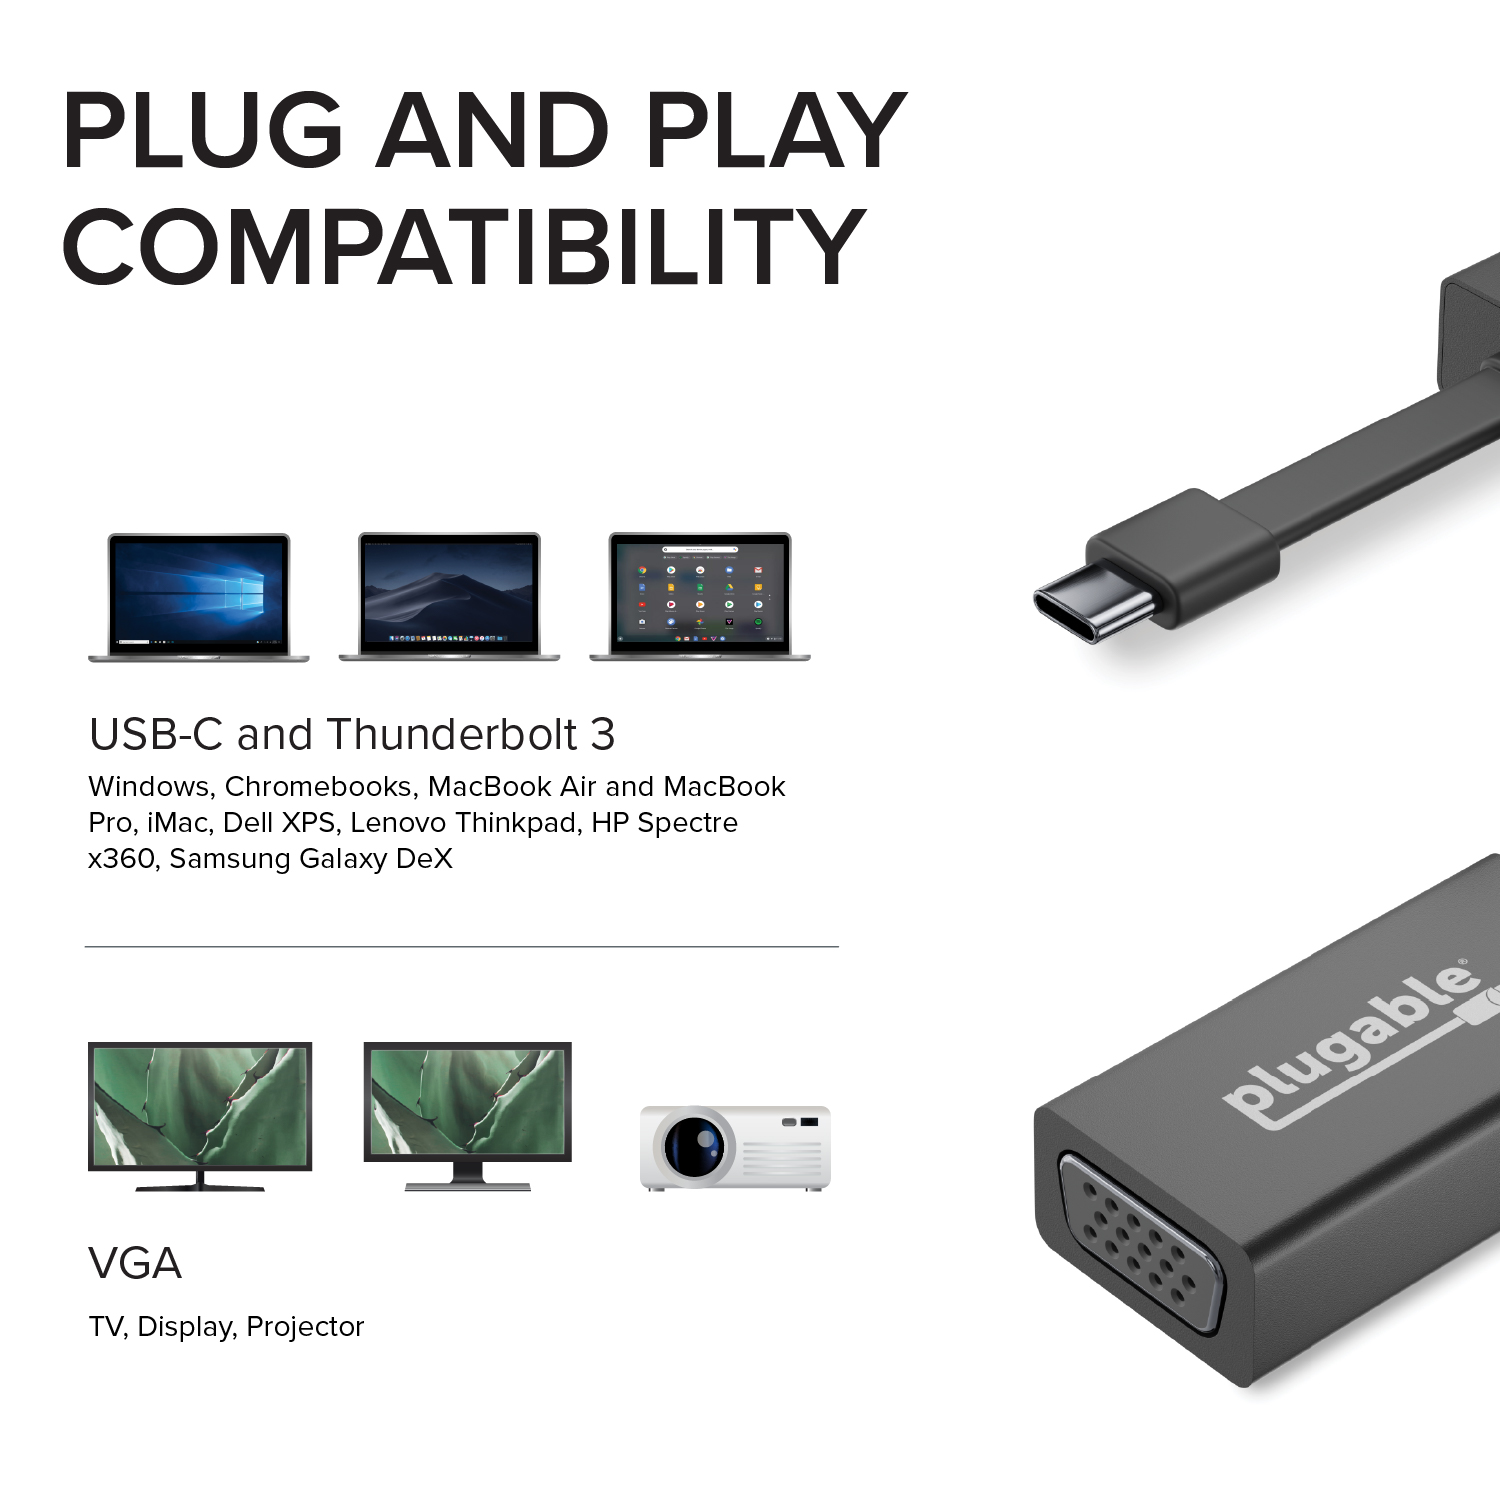 Plugable USB C to VGA Adapter, Thunderbolt 3 to VGA Adapter Compatible with Macbook Pro, Windows, Chromebooks, 2018 iPad Pro, Dell XPS, and more (Supports resolutions up to 1920x1200 @ 60Hz) - image 5 of 6